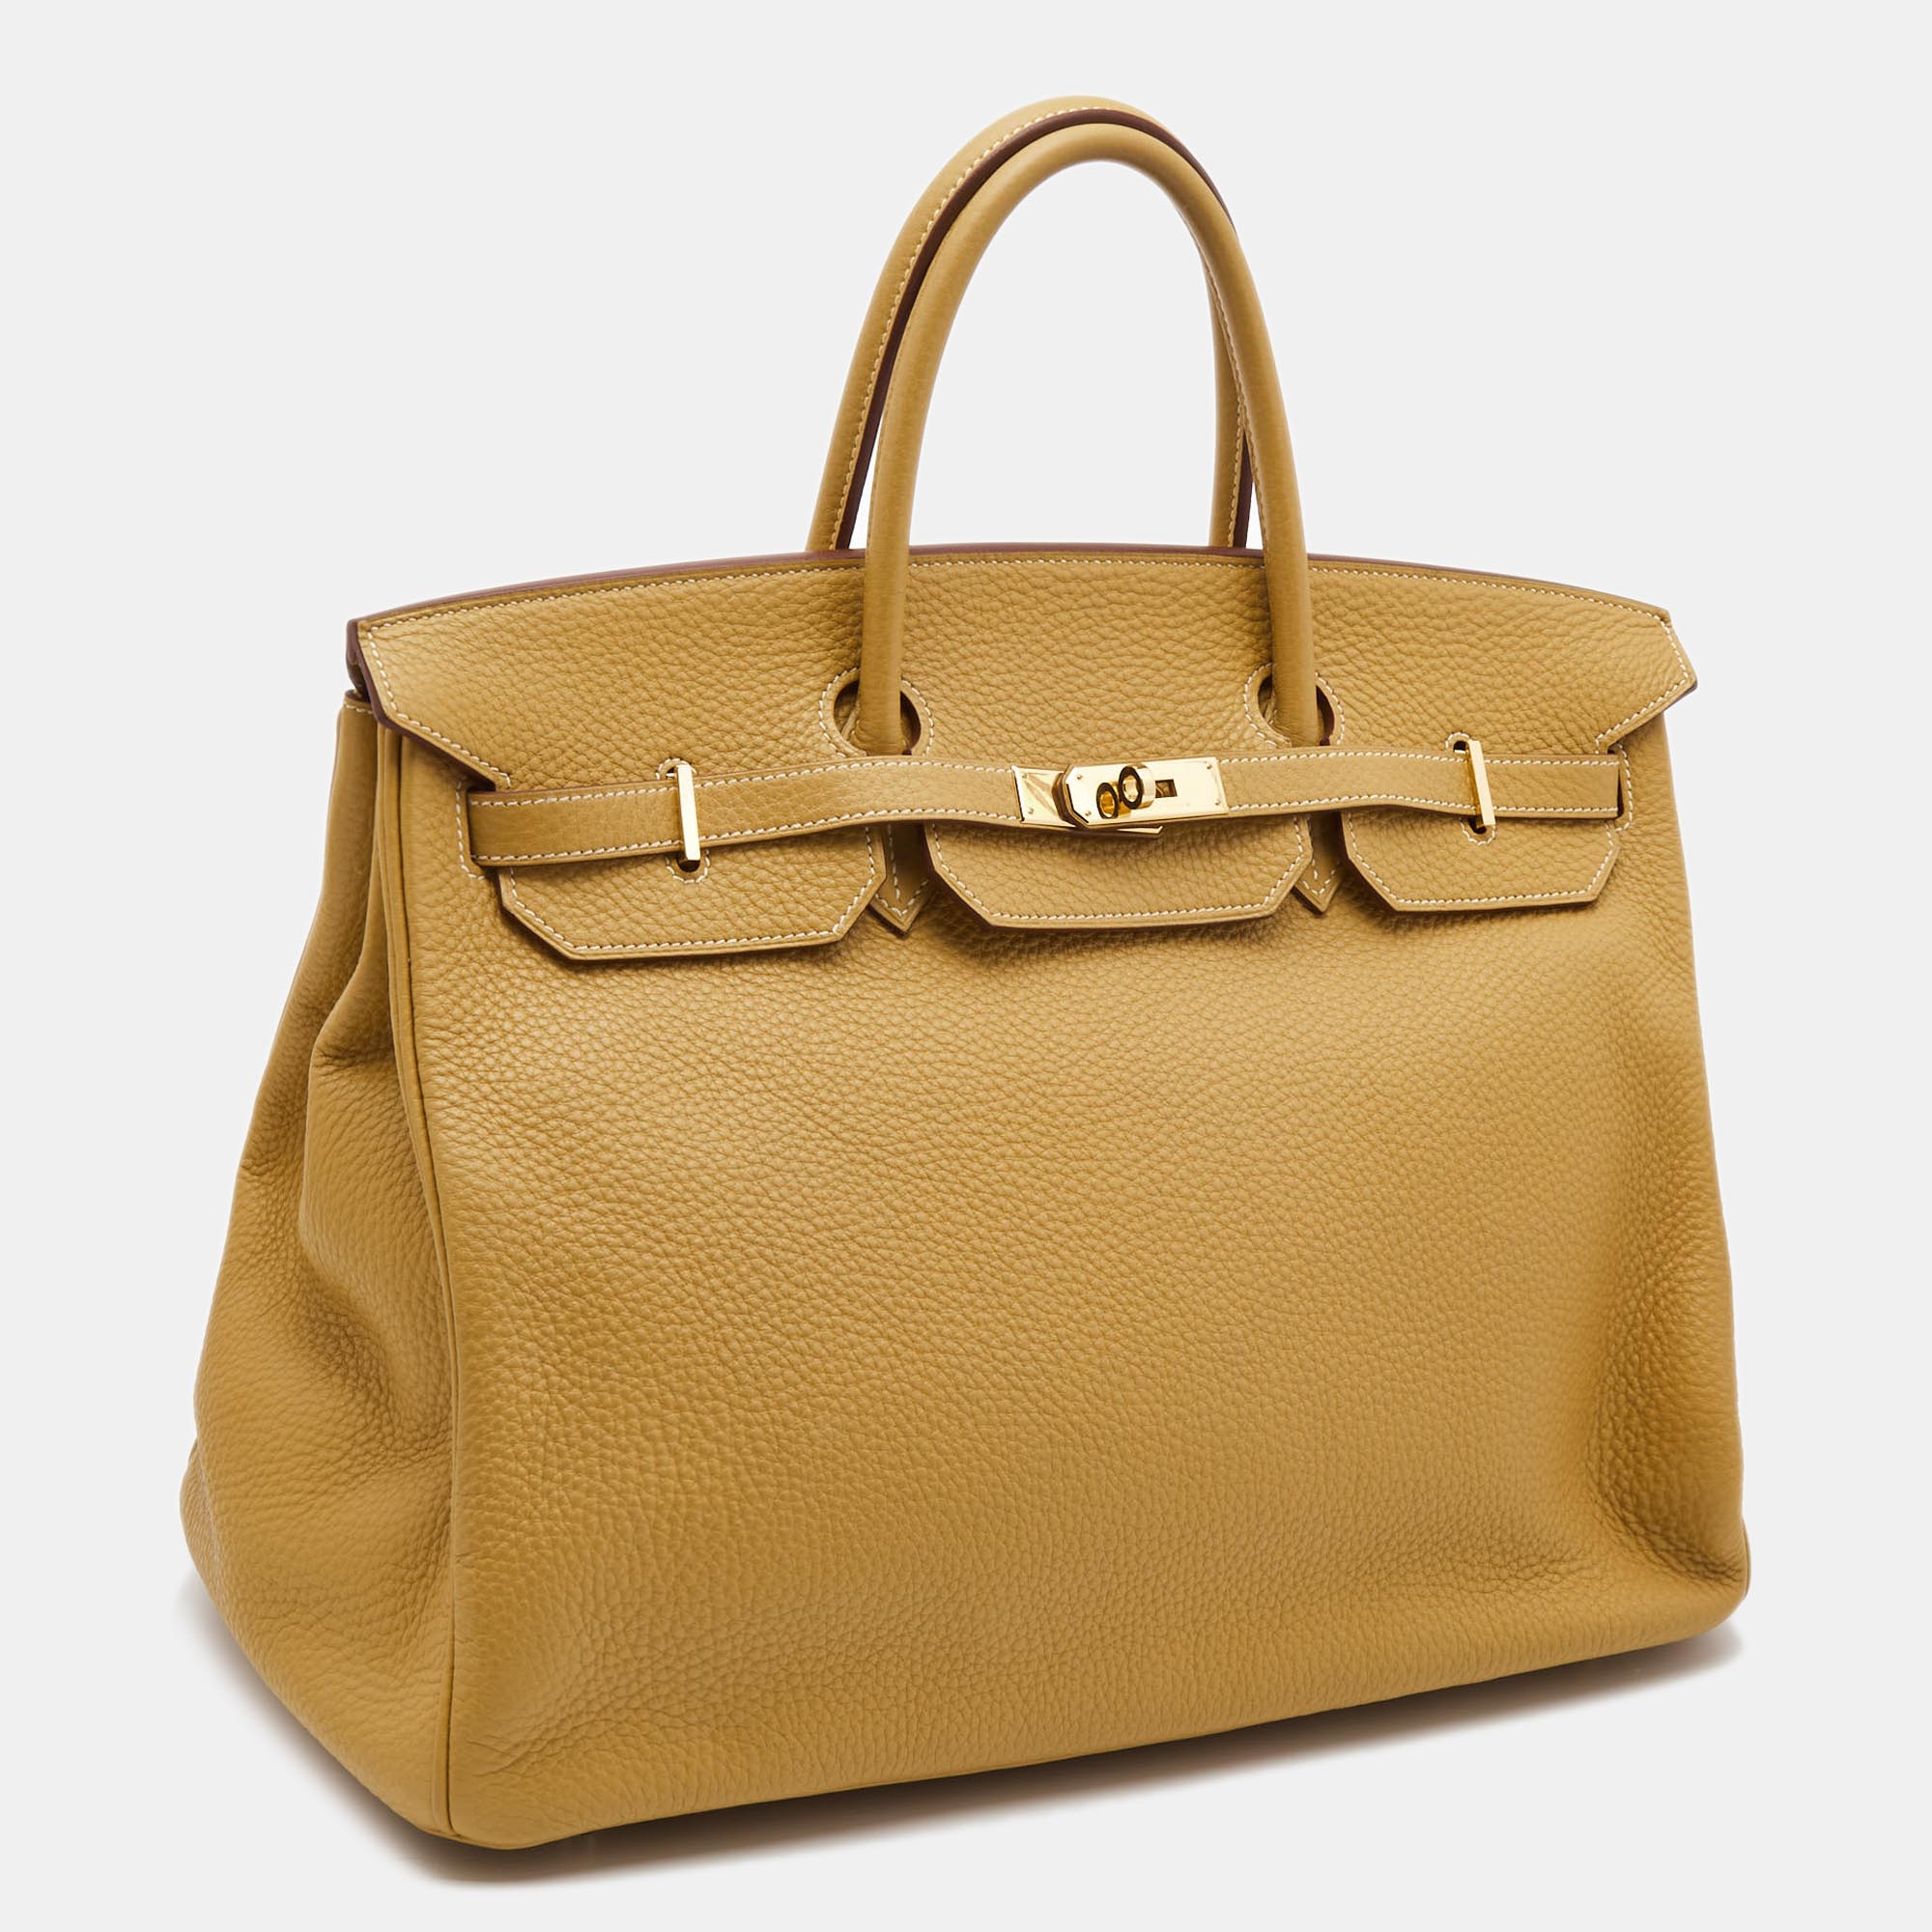 Hermes Curry Clemence Leather Gold Finish Birkin 40 Bag